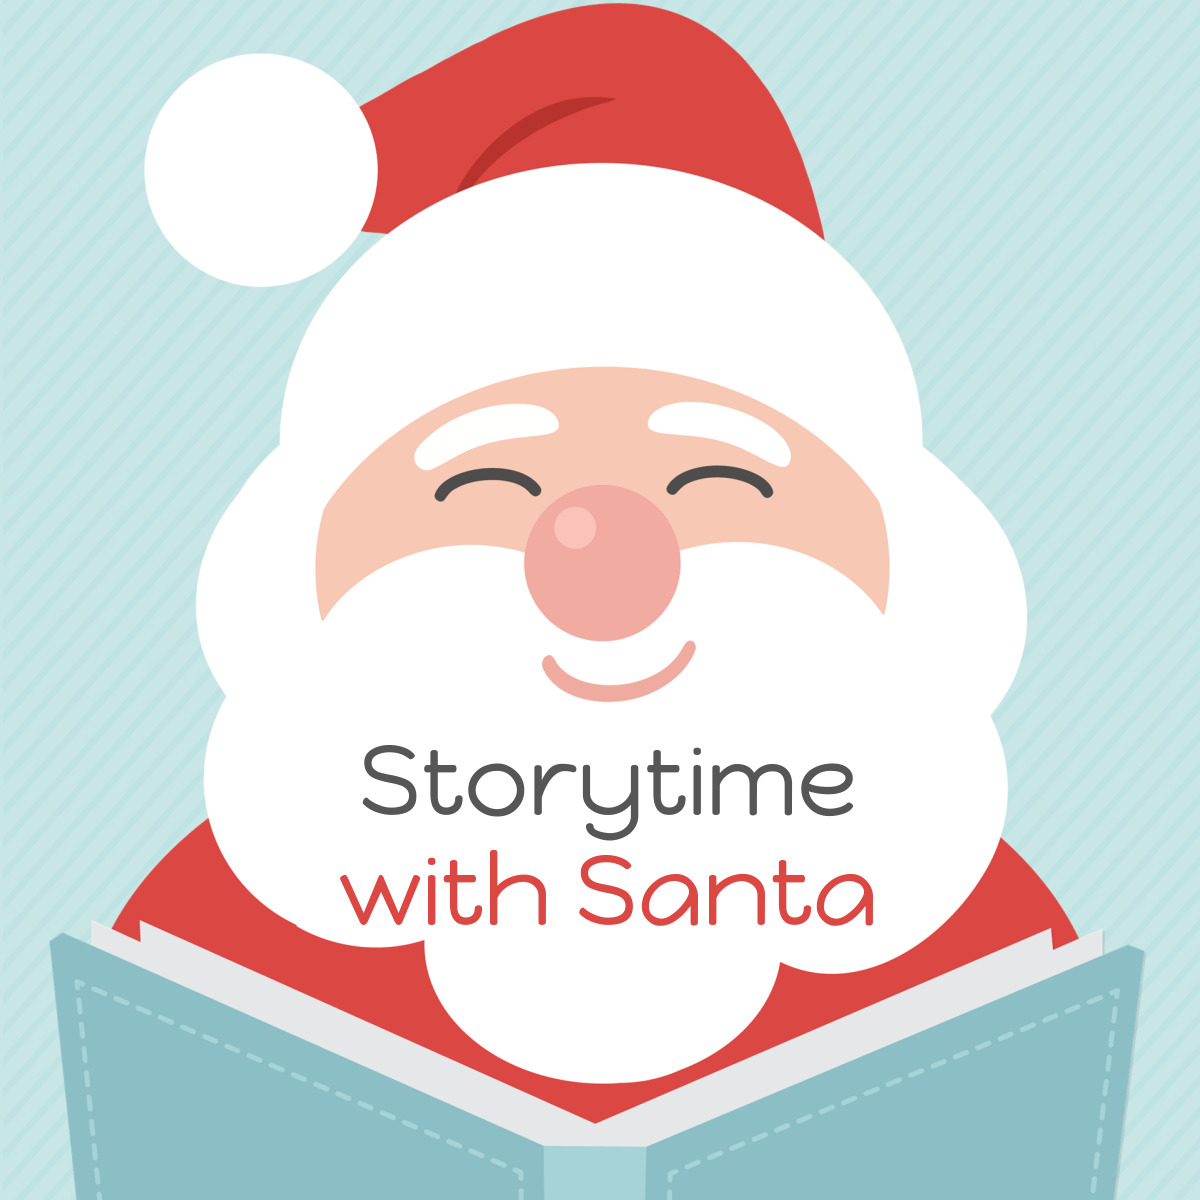 Storytime with Santa written on Santa's beard as he reads a book